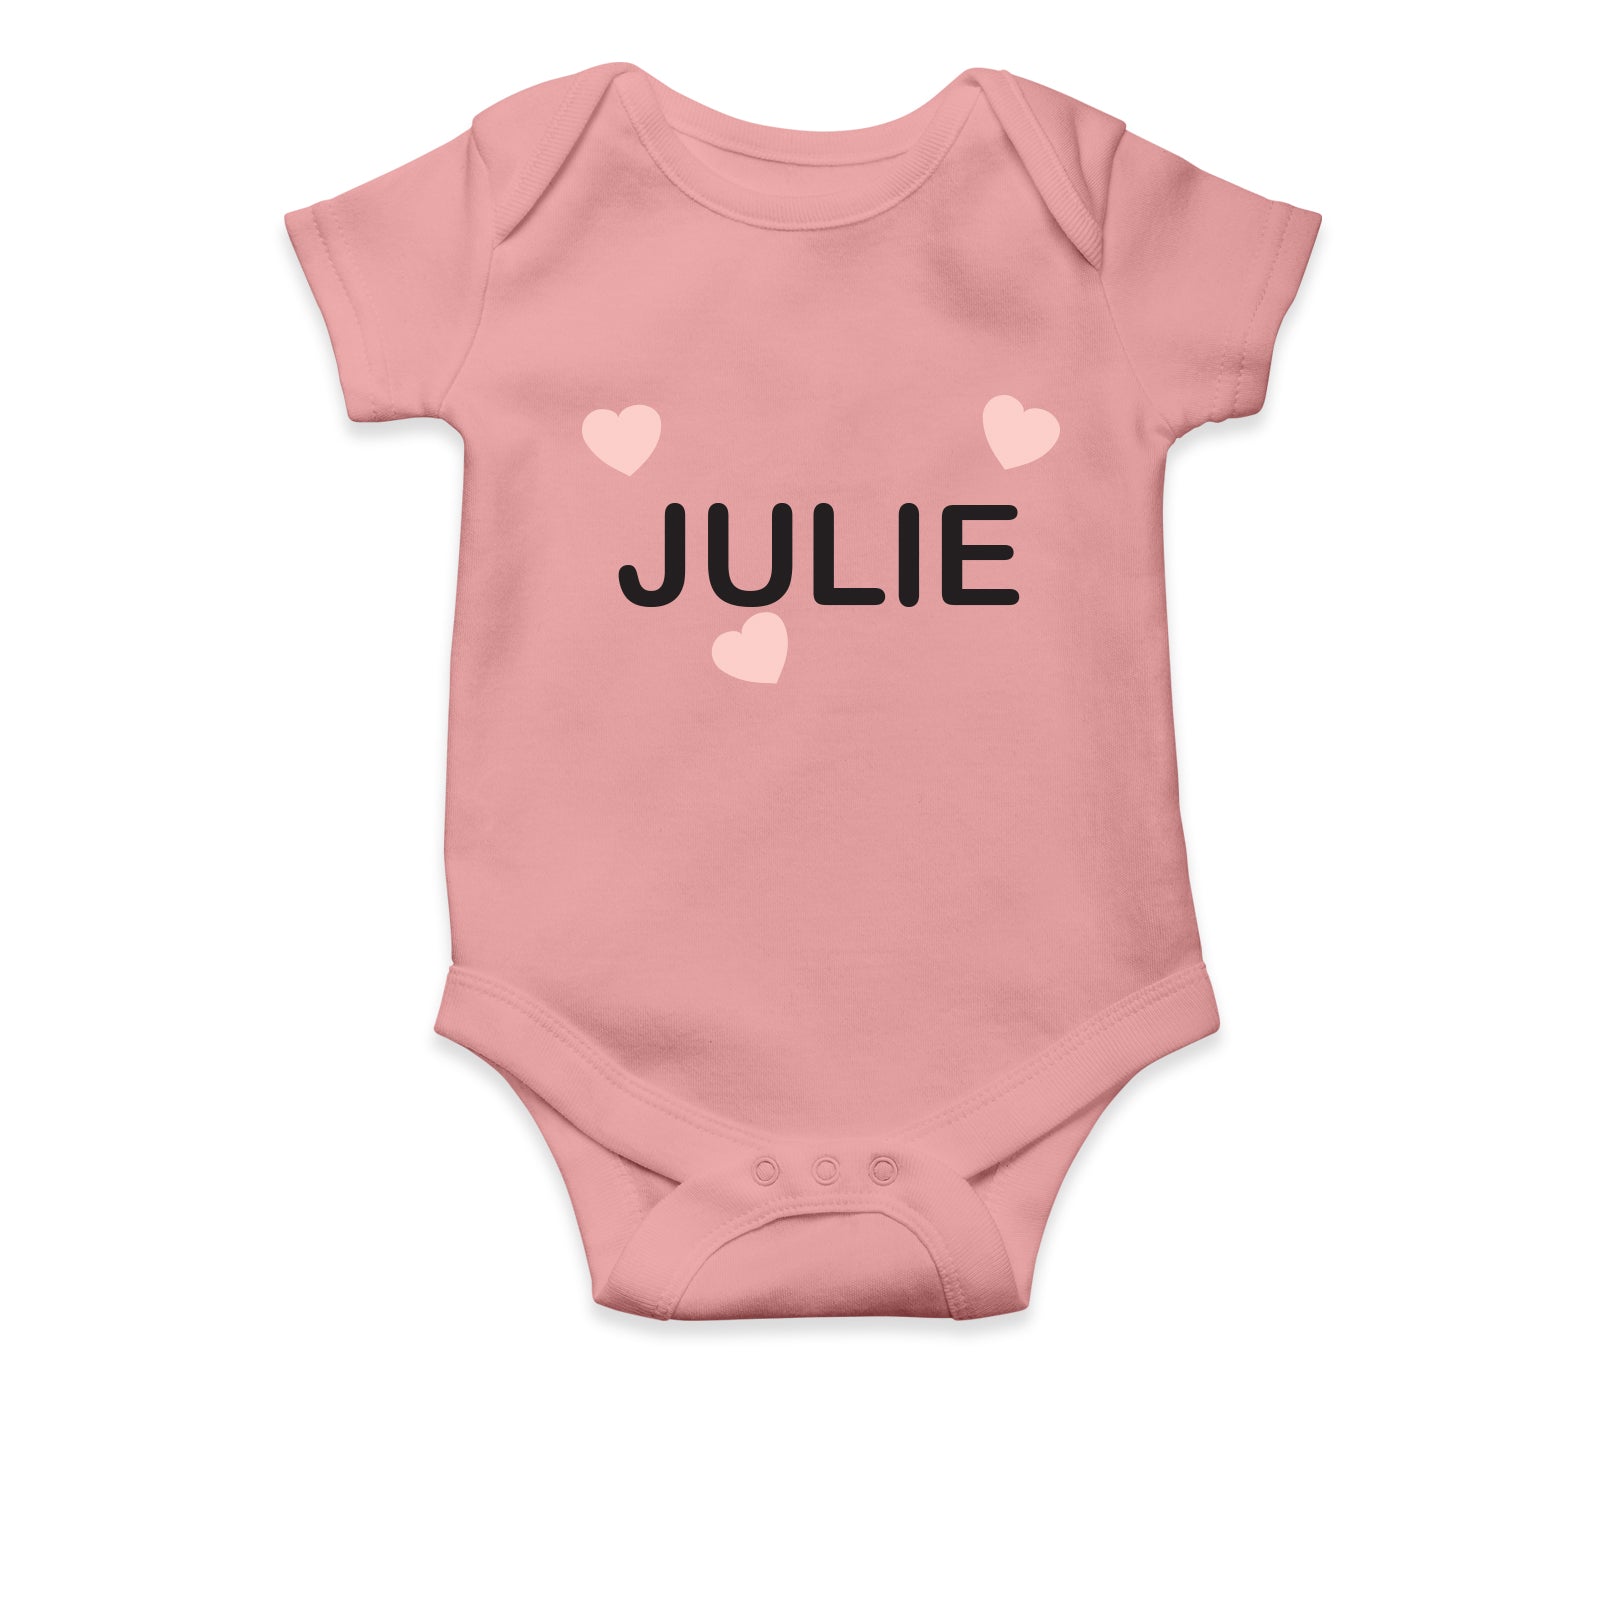 Personalised White Baby Body Suit Grow Vest - Comfort!